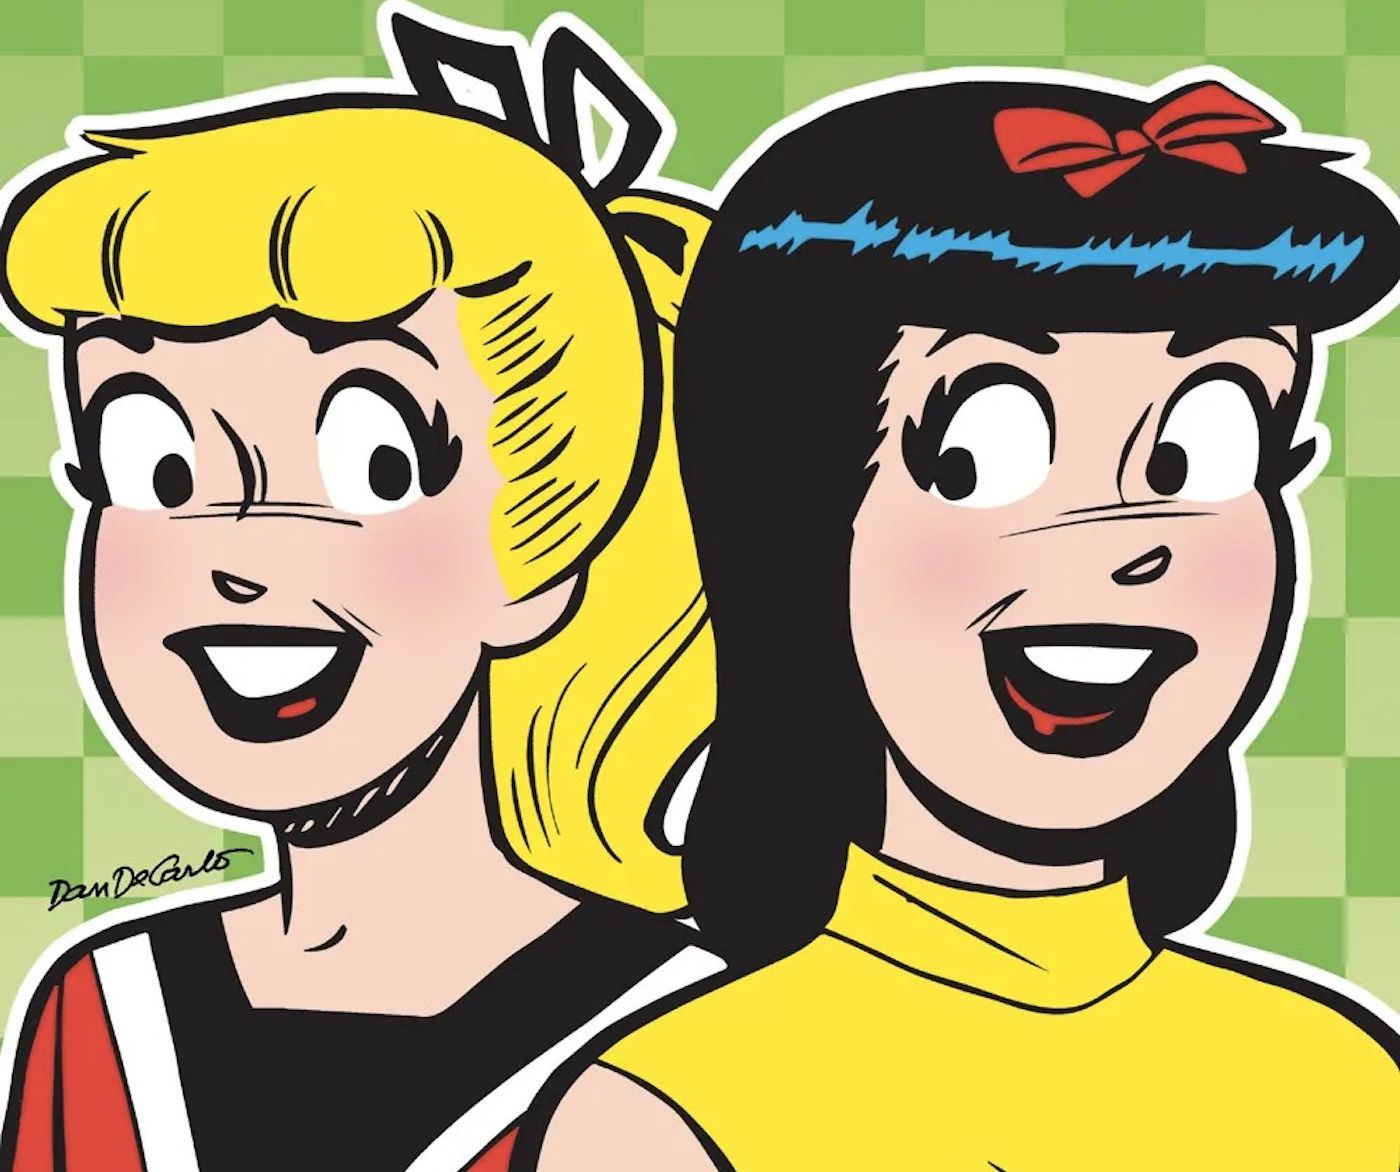 This Archie Parody Predicted Betty & Veronica’s Relationship Way Before Riverdale